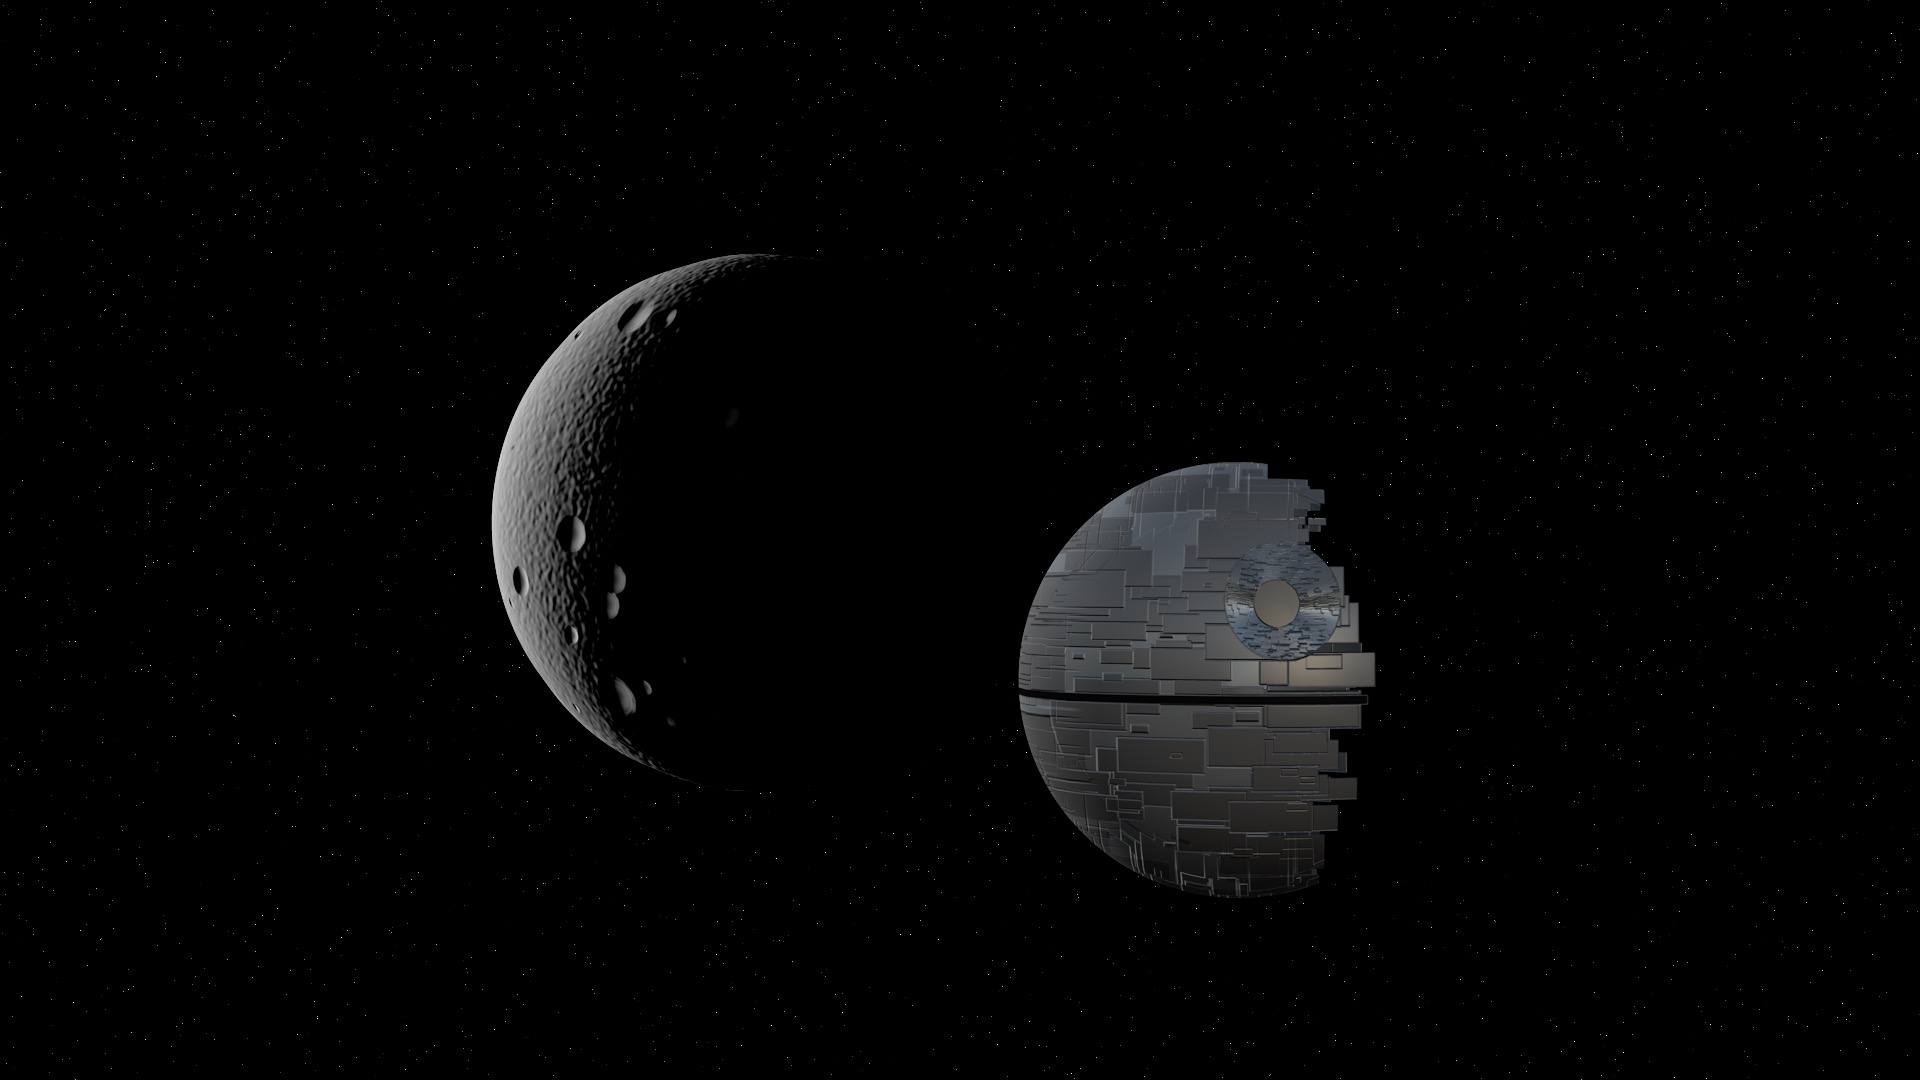 Death Star and Moon - 3D models made in Motion